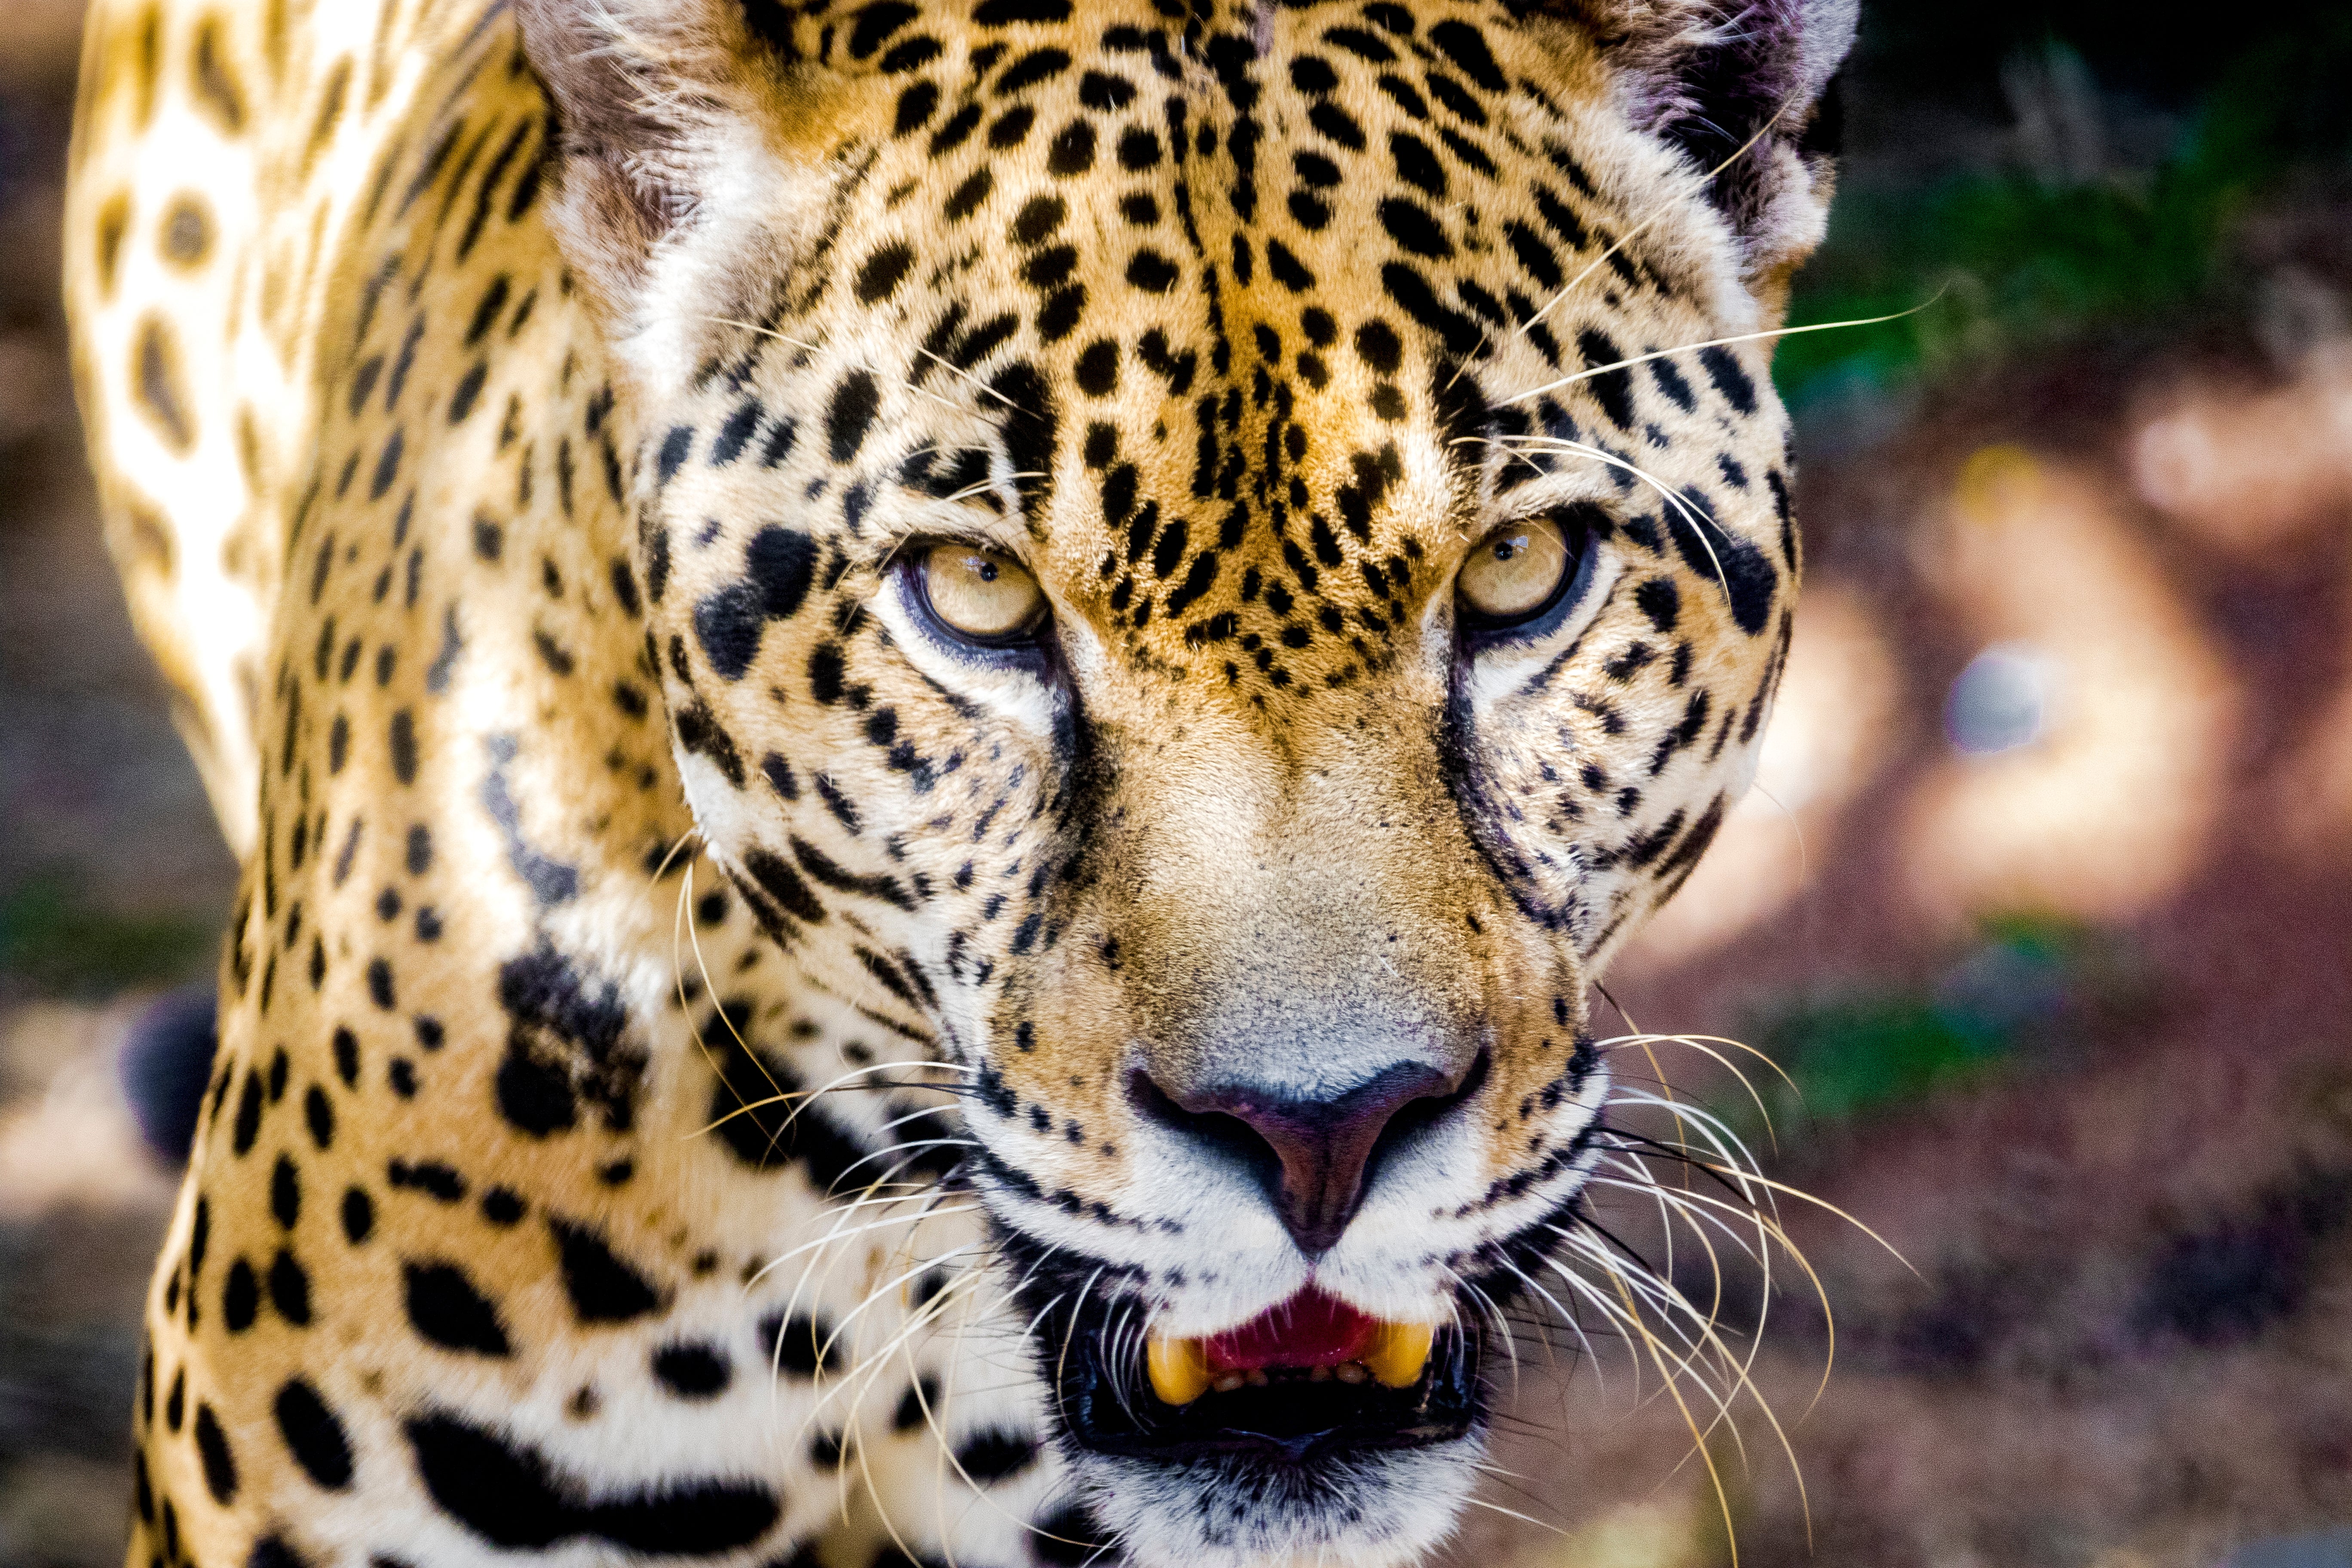 Panama Risks Becoming a Broken Link in an Intercontinental Wildlife Route -  Scientific American